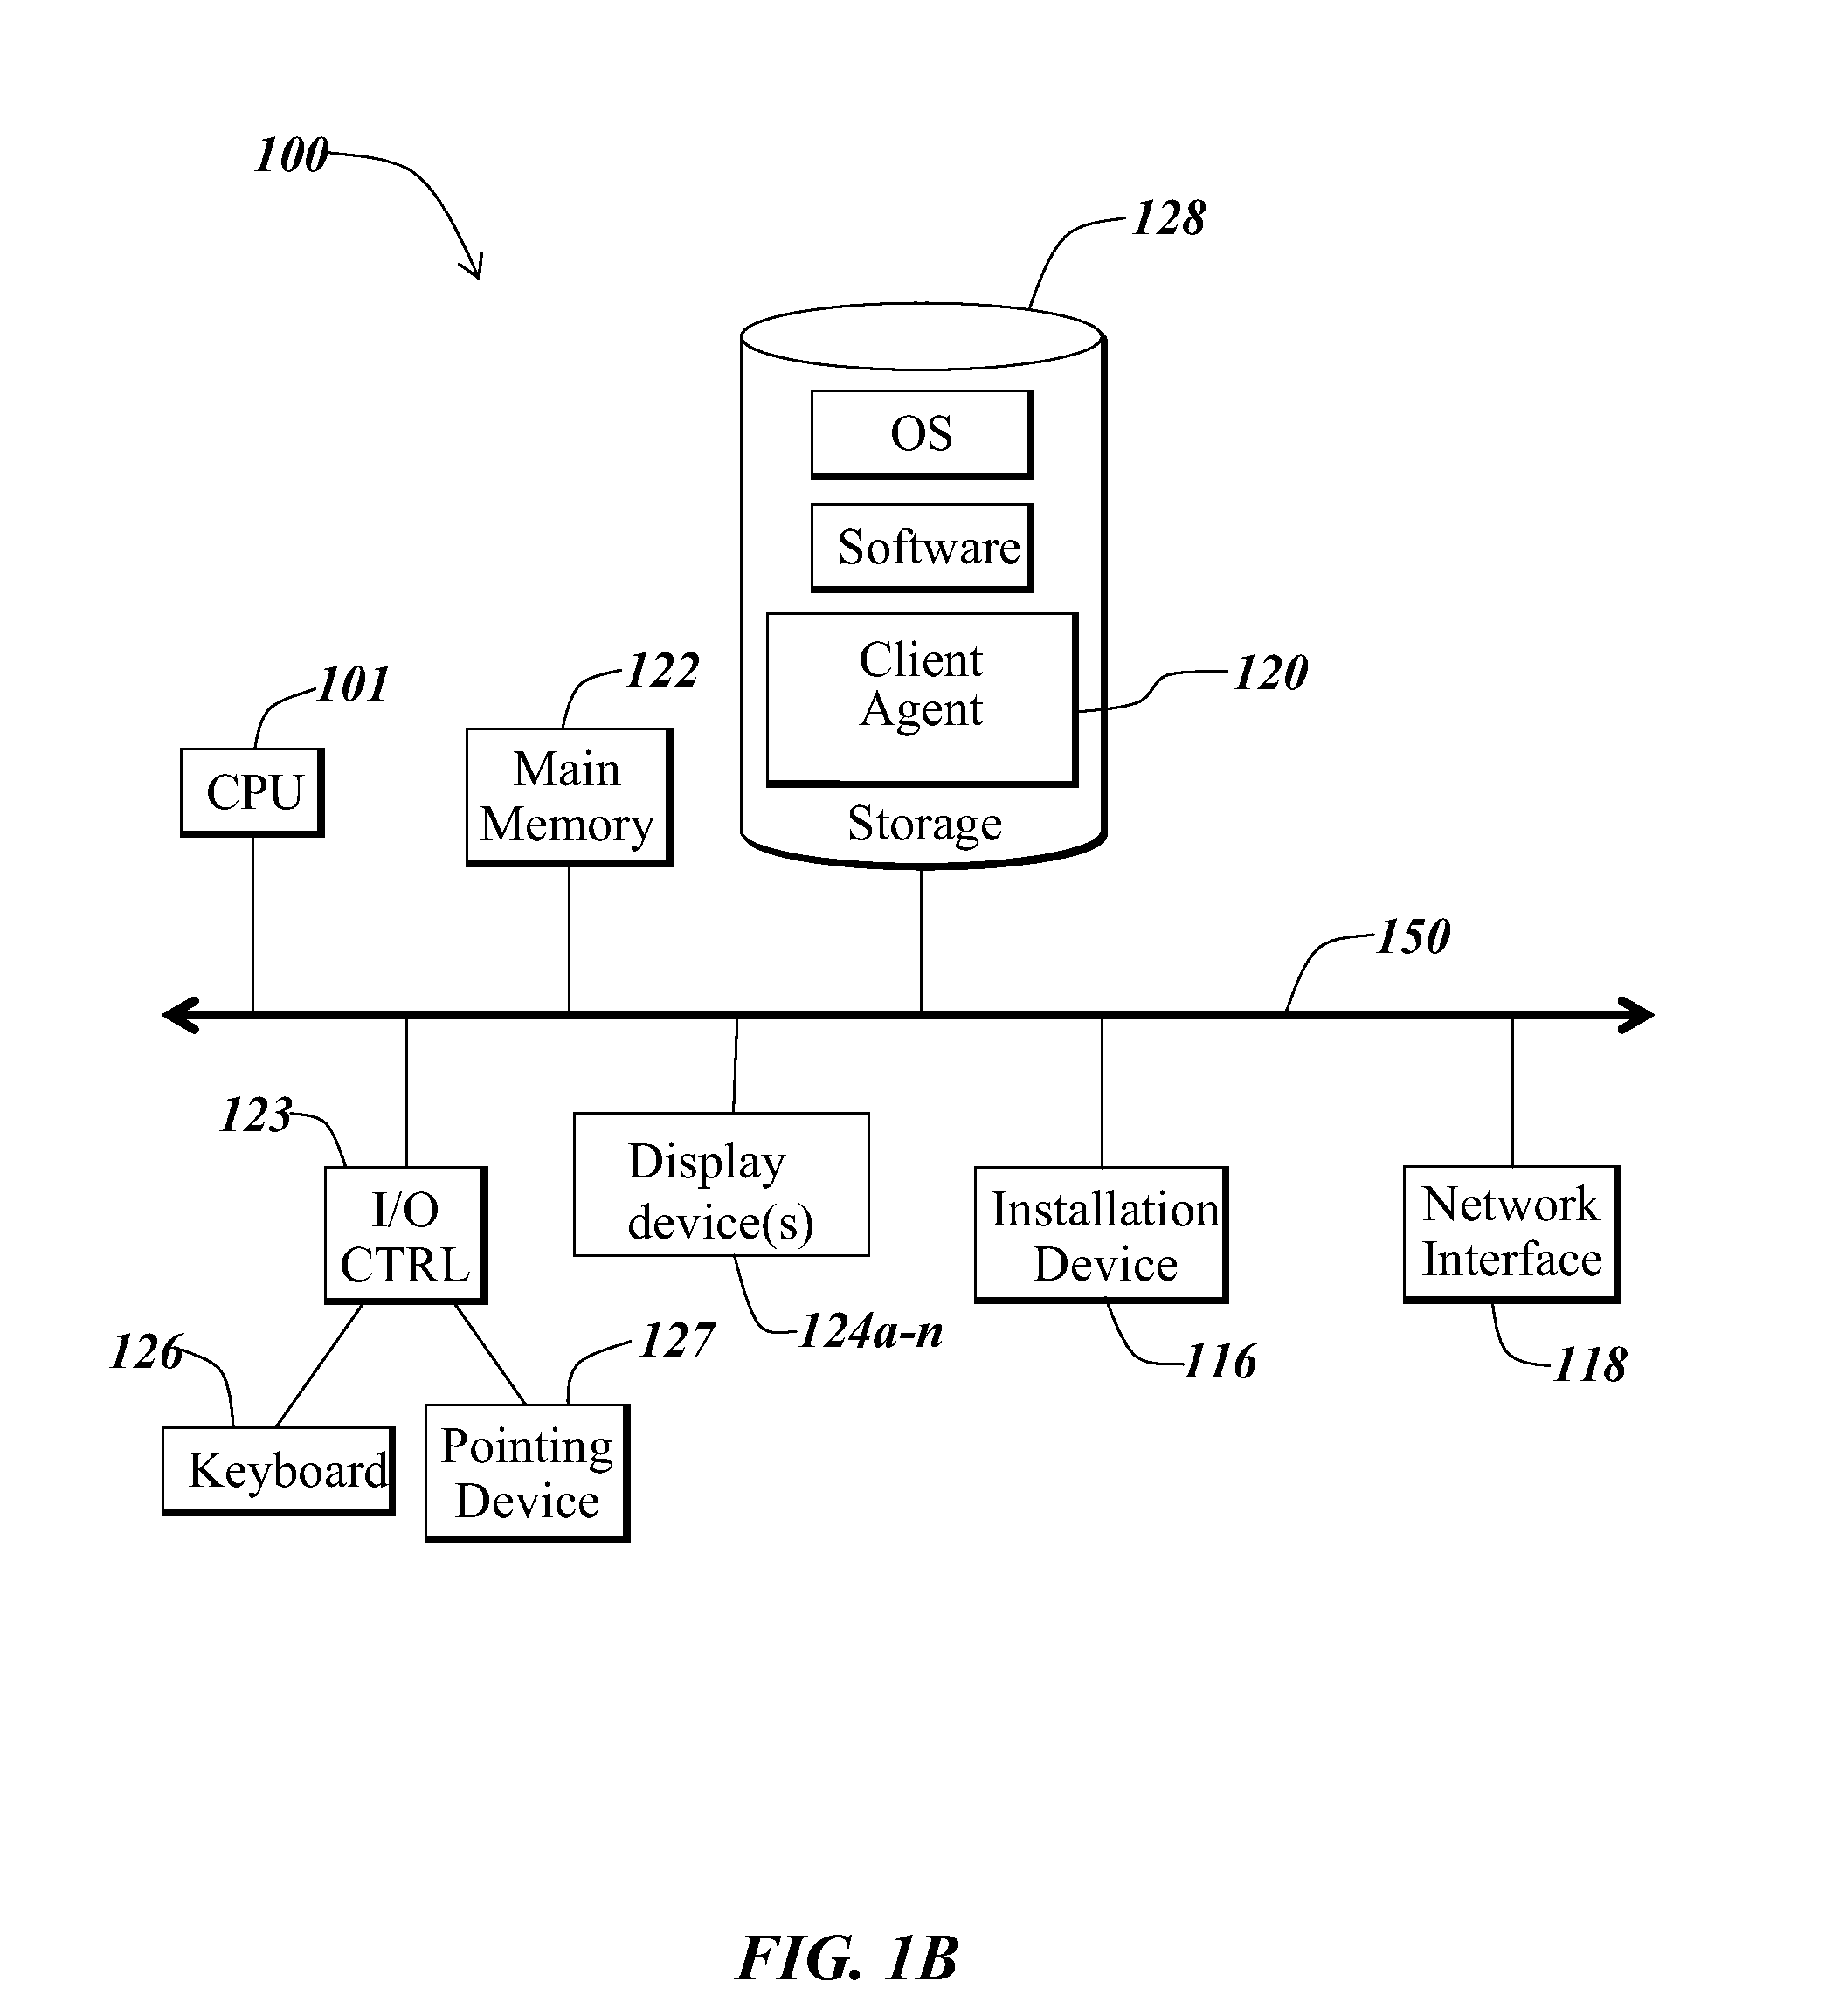 Systems and Methods for Validating an Order Purchased With an Unspecified Term